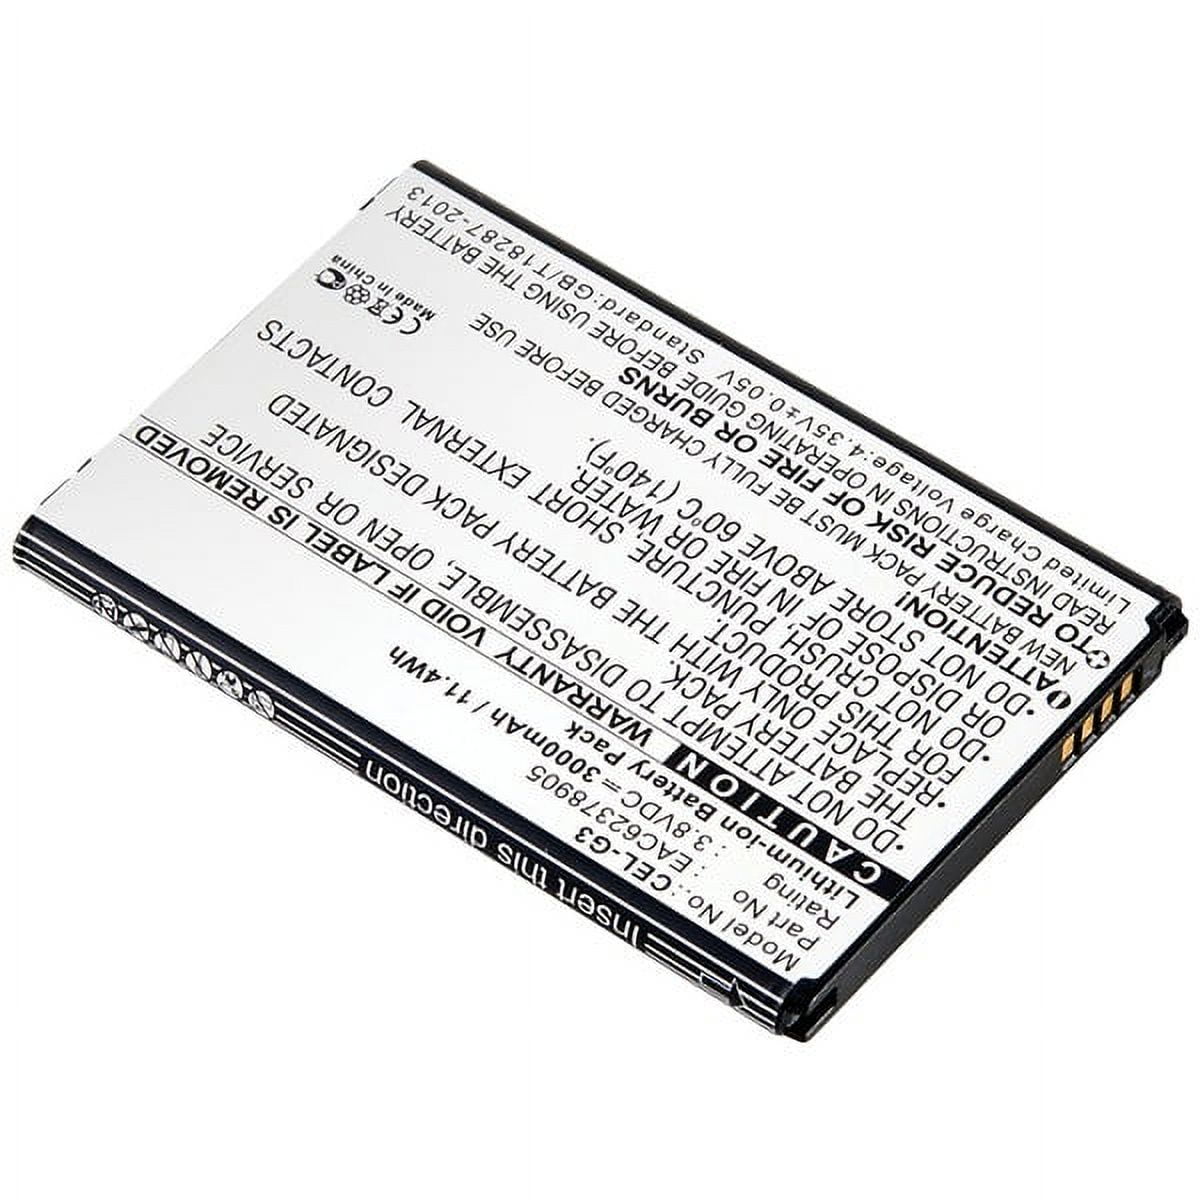 Picture of Dantona CEL-G3 Lithium Rechargeable Replacement Battery for LG Cellular Phones